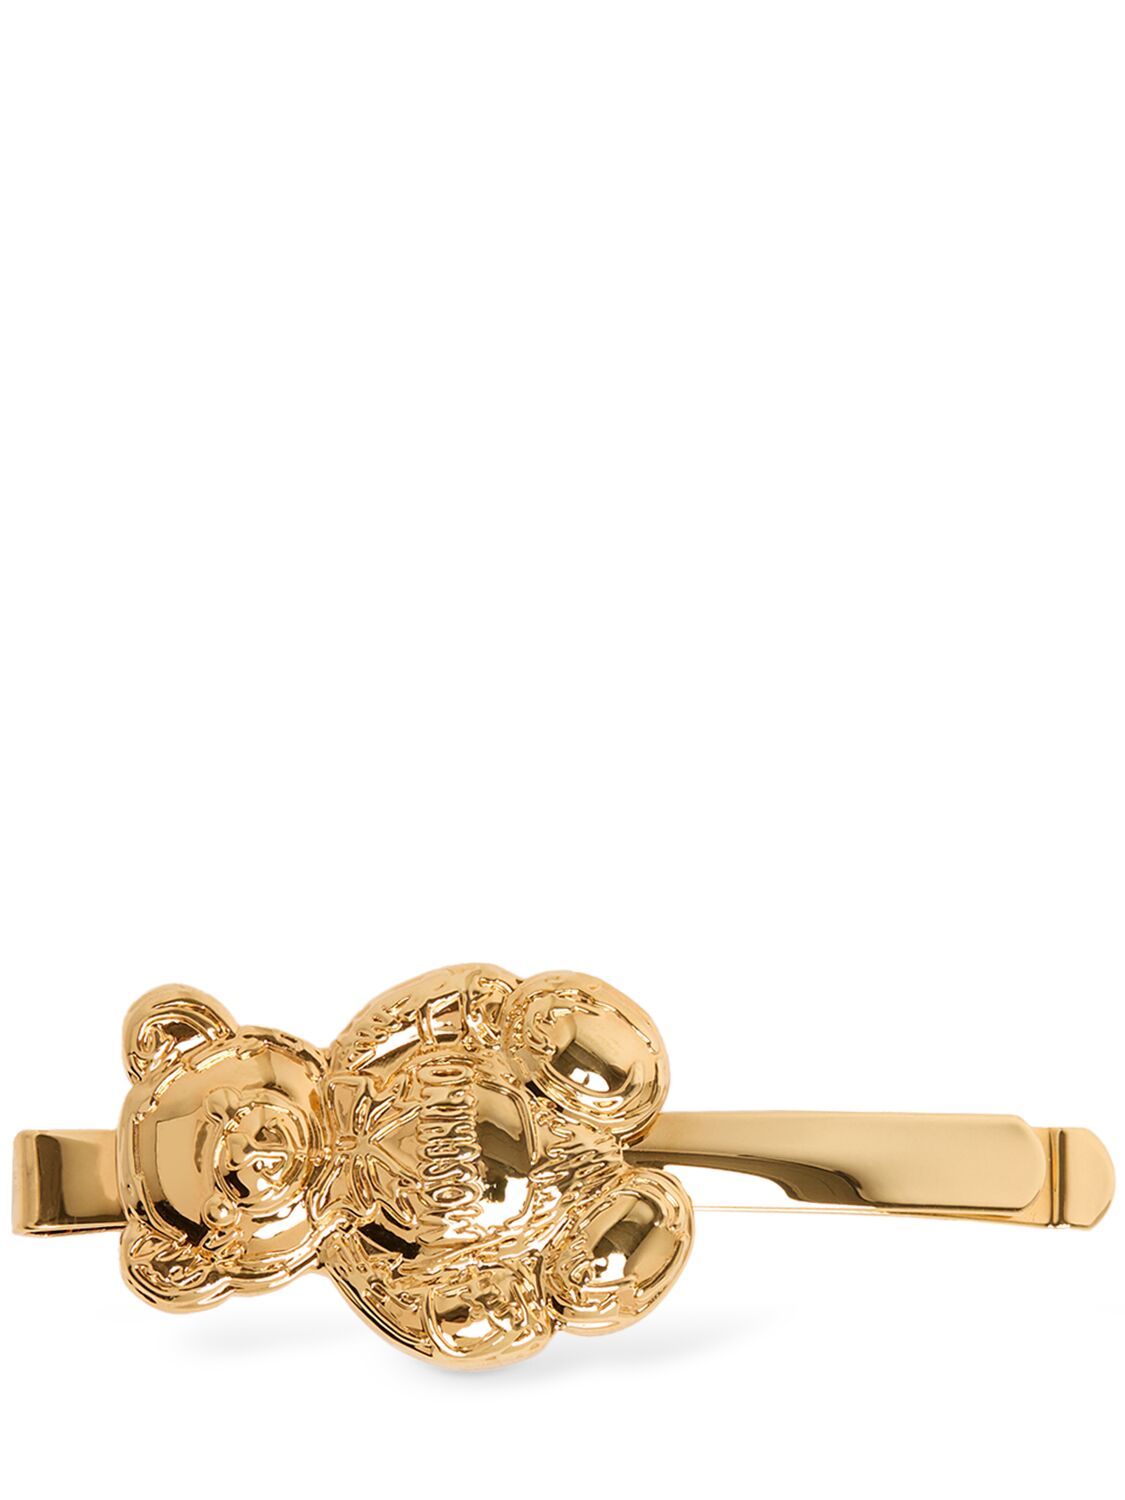 Moschino Archive Teddy Bear Hair Clip In Gold